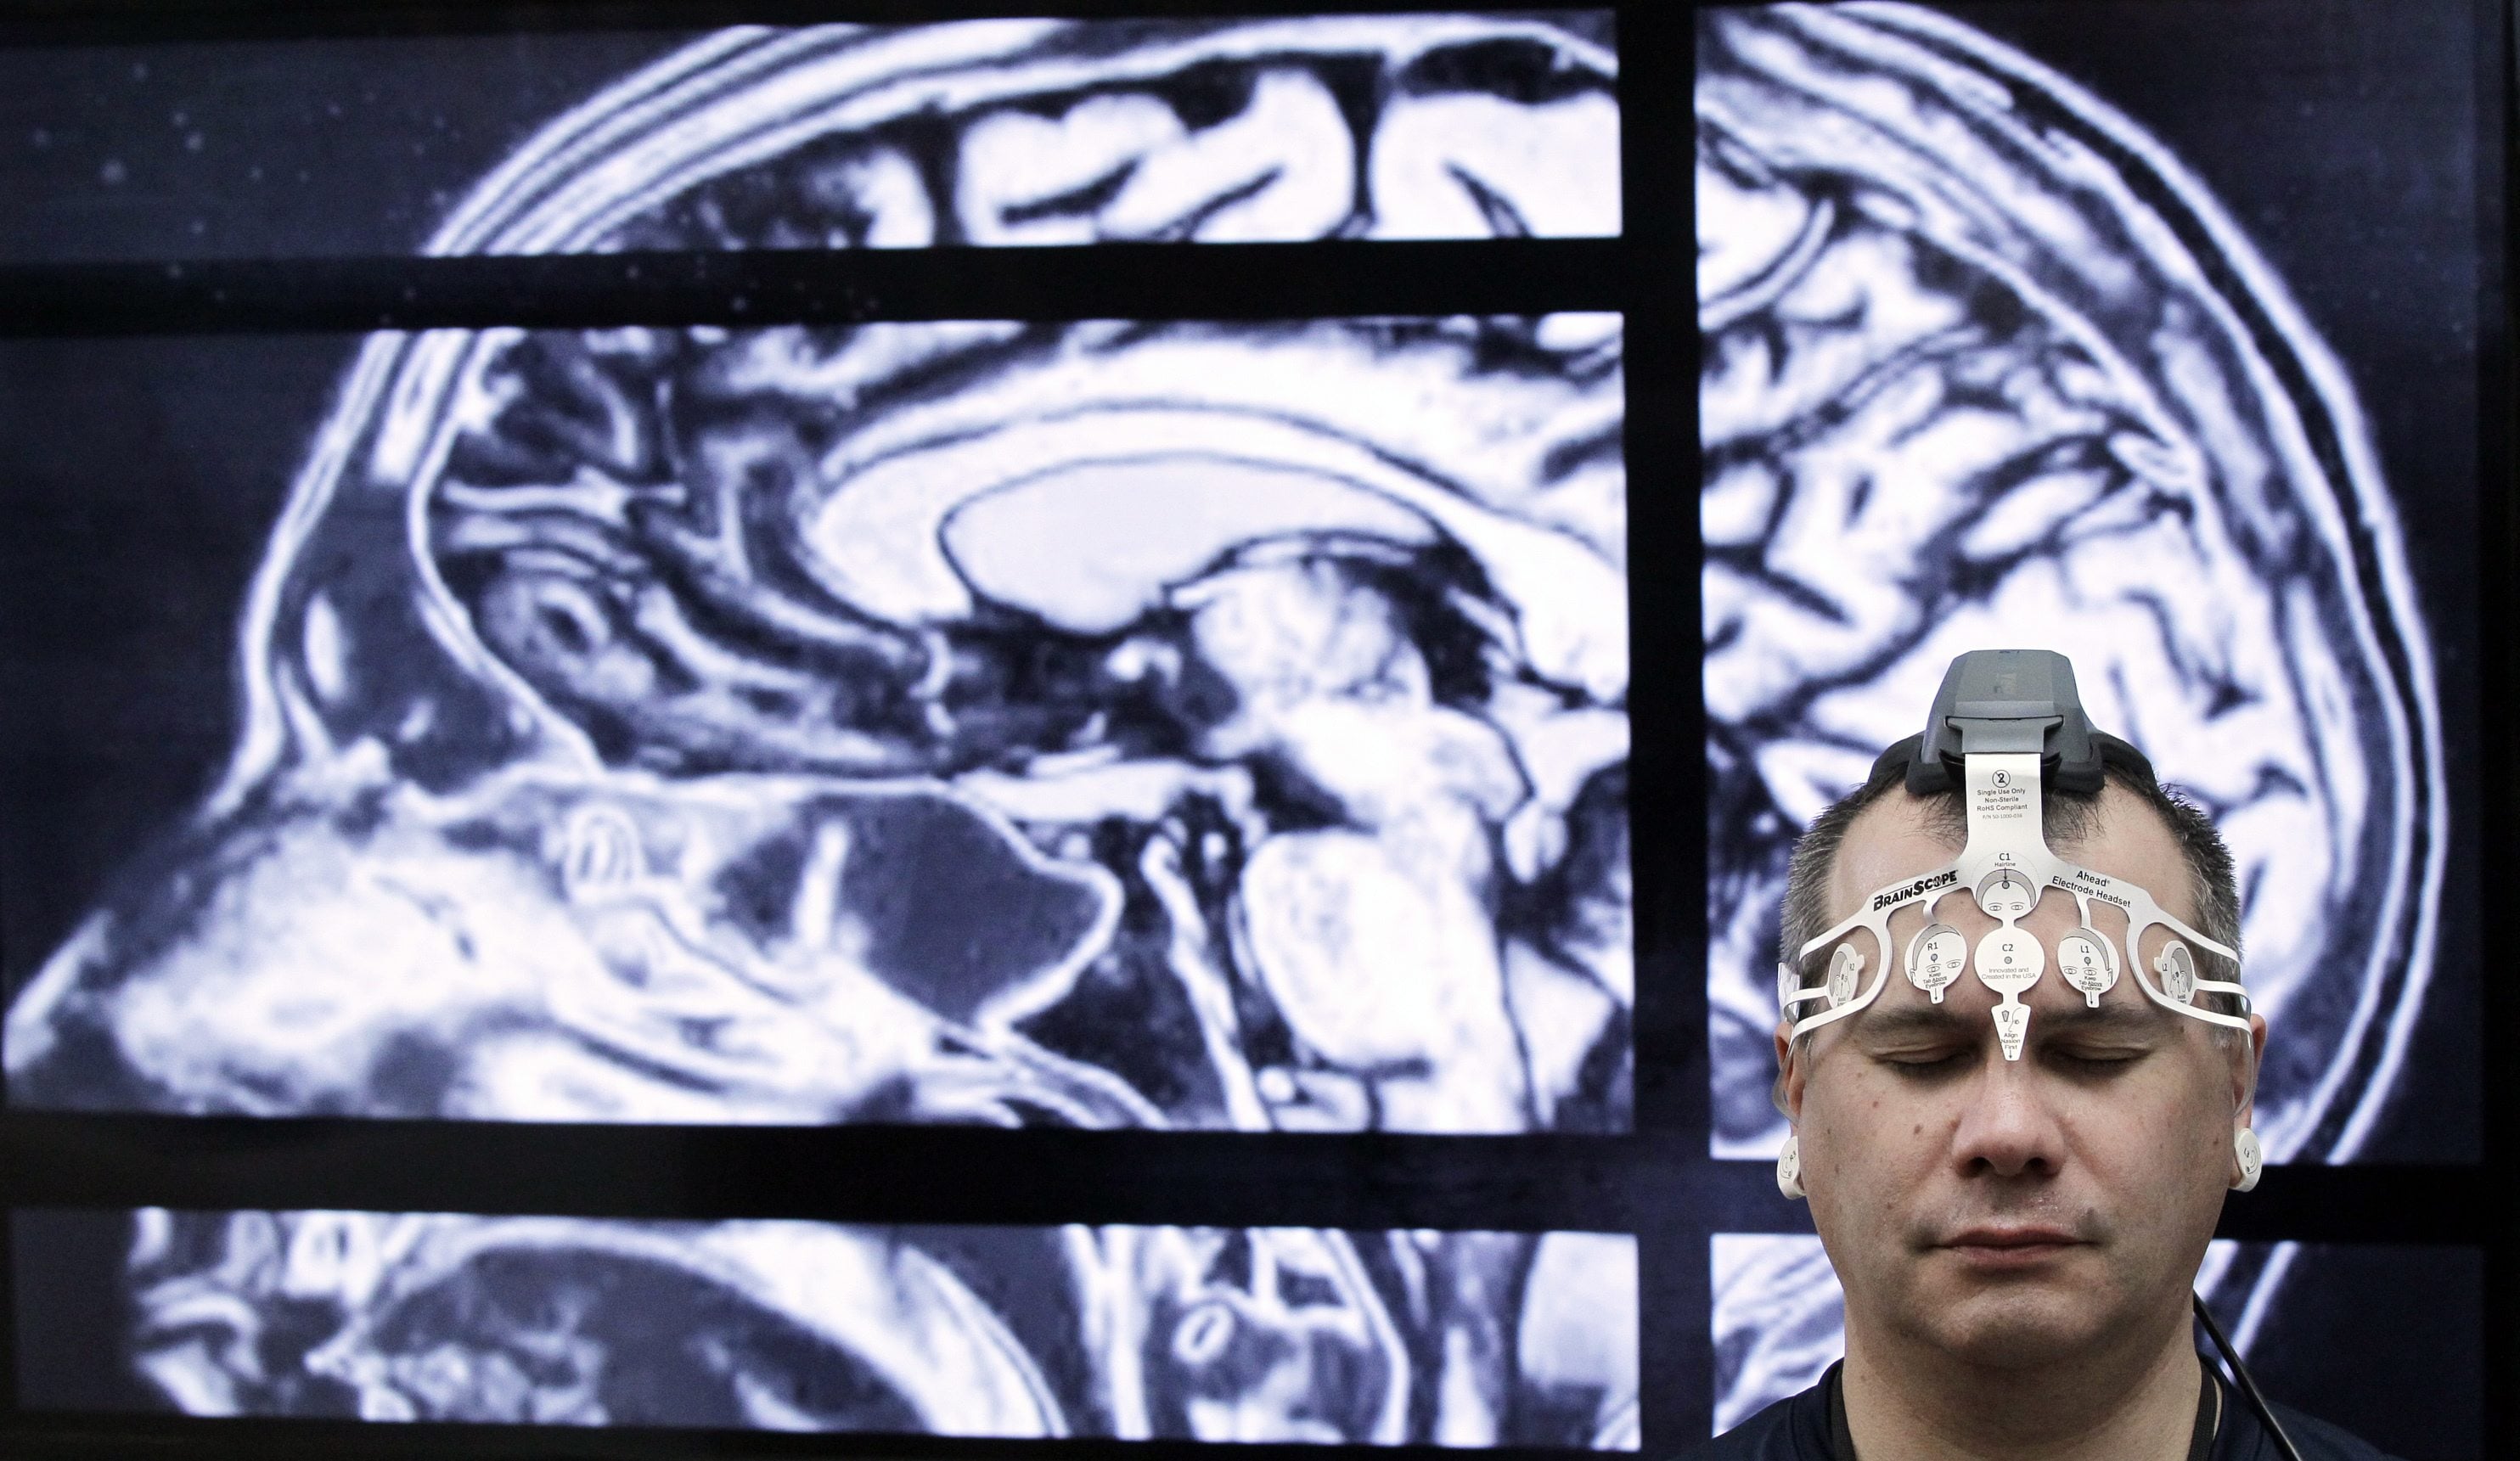 BrainScope employee Doug Oberly wears a brain scanning headset at the NFL owners' meeting in Boca Raton, Fla., Tuesday, March 22, 2016. The headset and mobile app can quickly and easily allow clinicians to determine whether patients have sustained a traumatic brain injury (TBI), the company says. (AP Photo/Luis M.